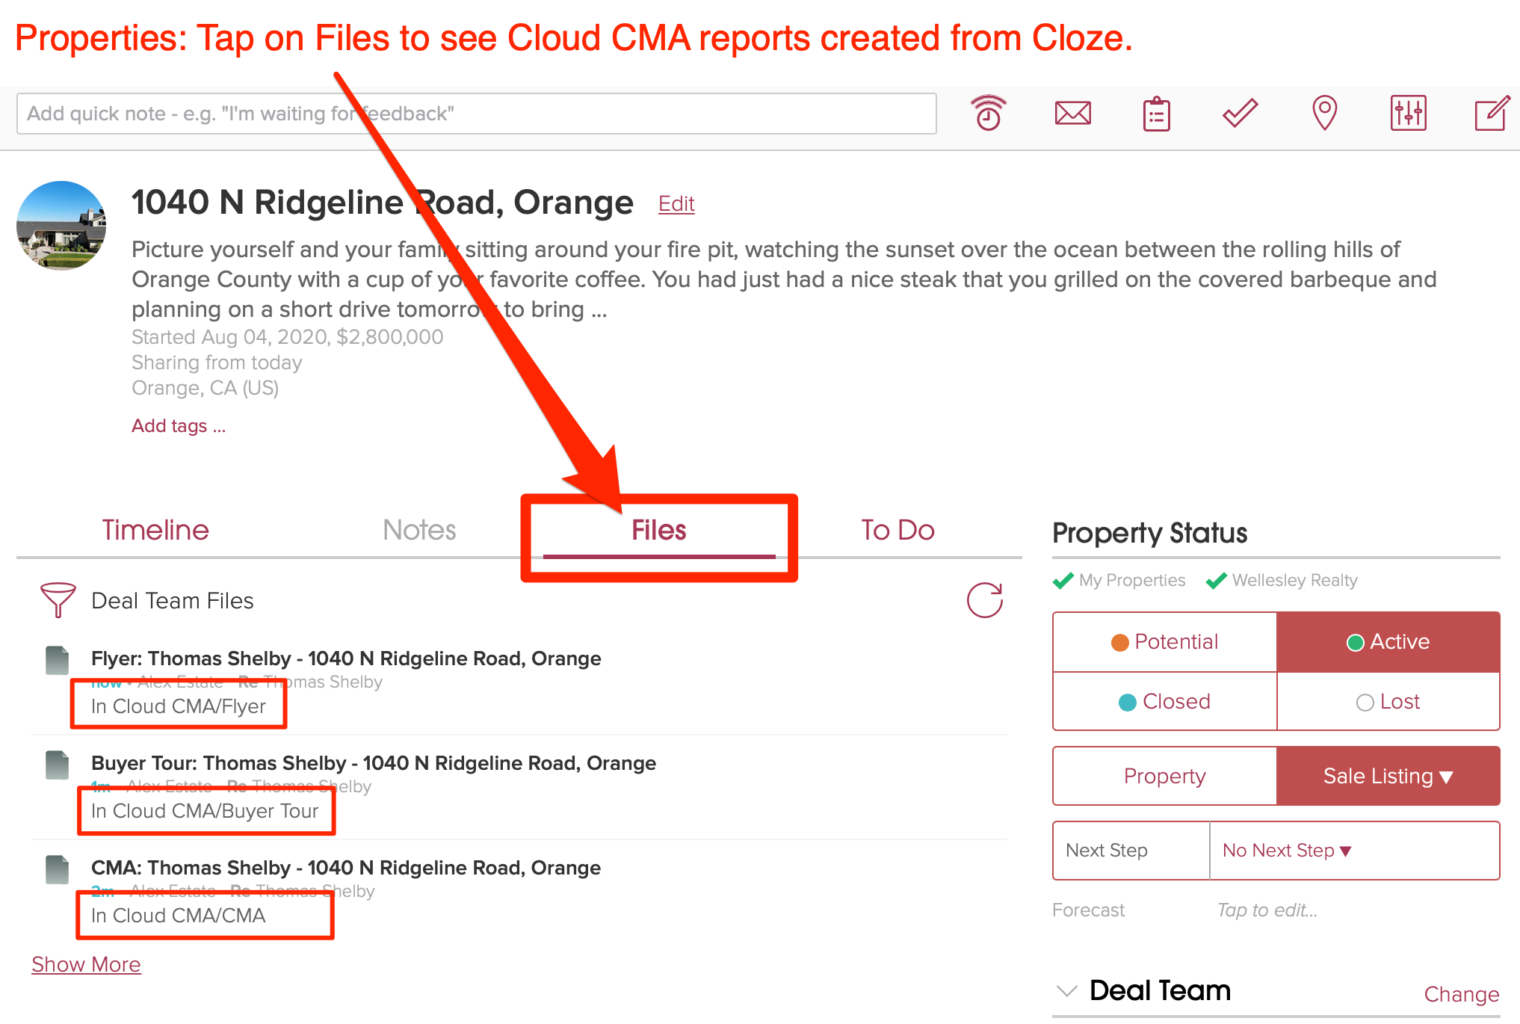 Tap on Files to see Cloud CMA reports created from Cloze on a property. 